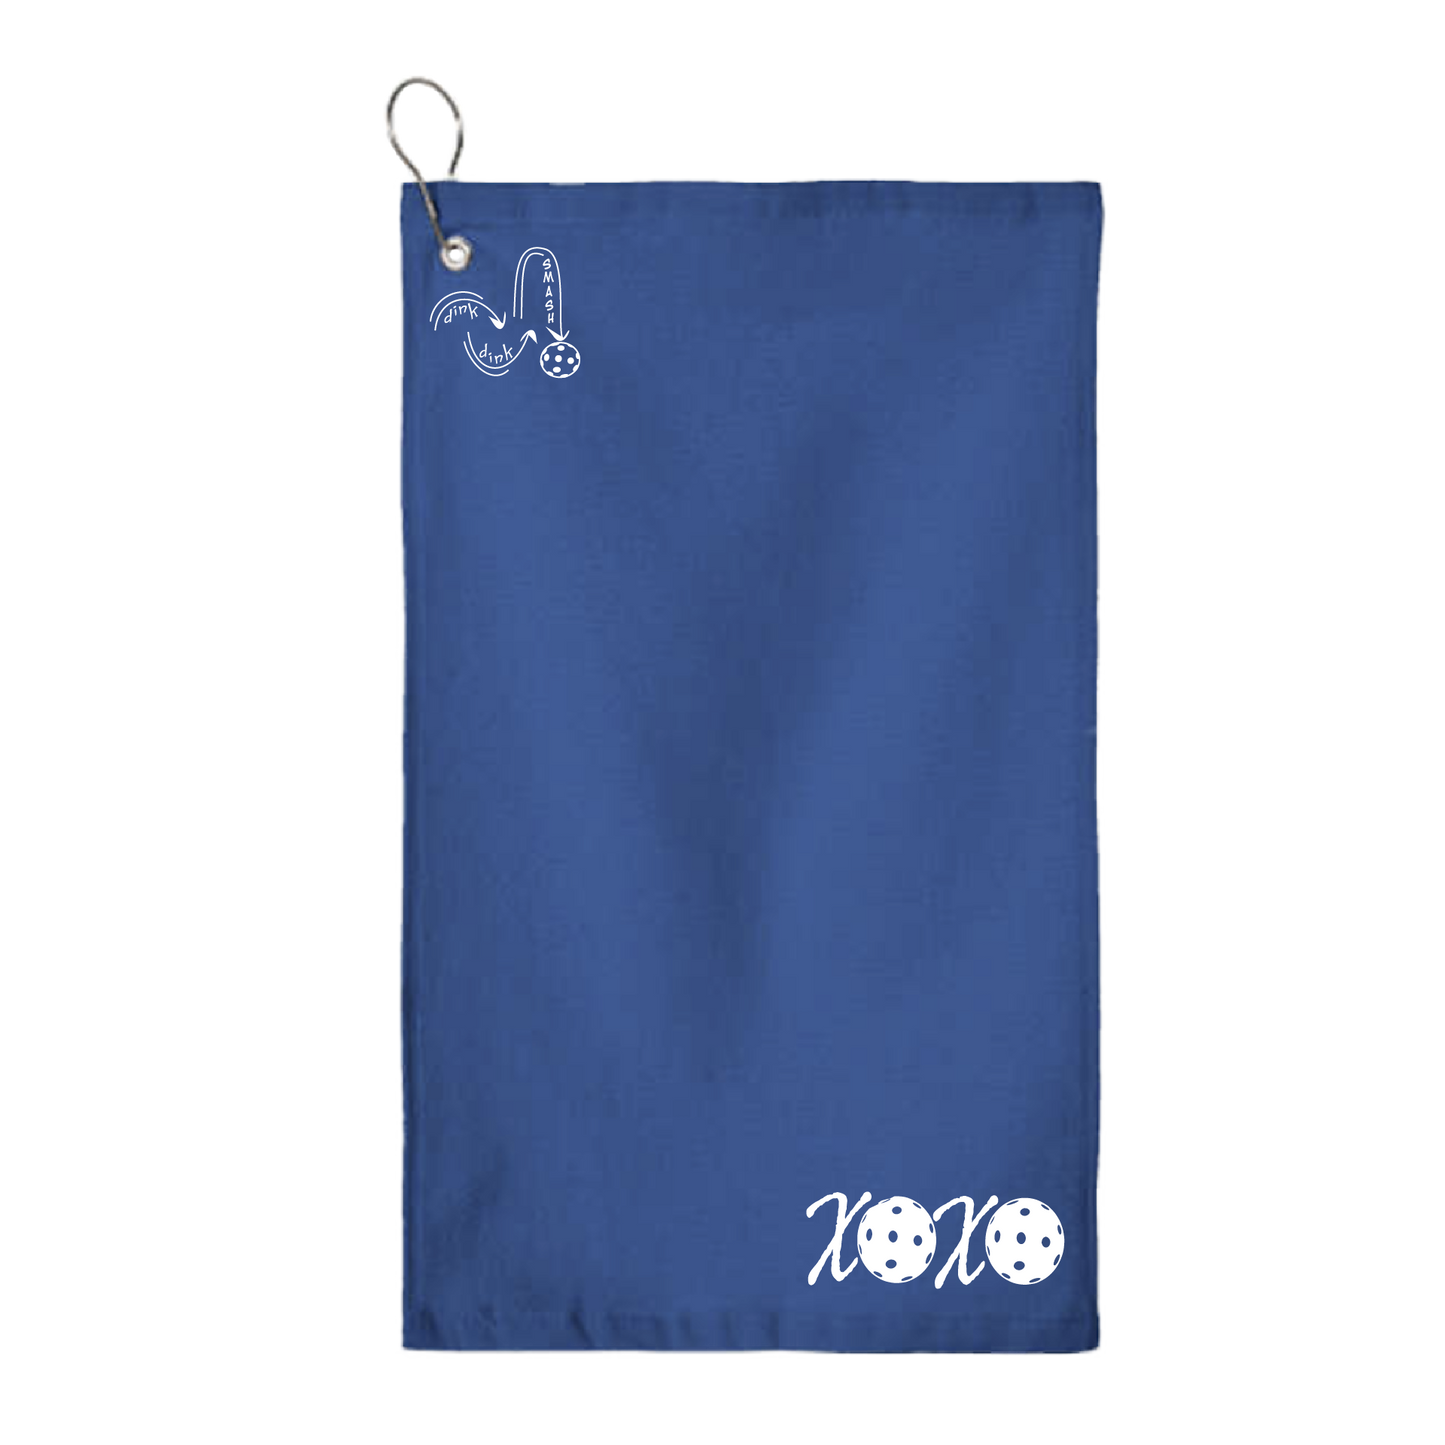 This XOXO pickleball towel is crafted with cotton terry velour for optimal performance. It features grommets, hooks, and hemmed edges for added durability. It's perfect for completing your pickleball gear, and an ideal gift for friends and tournaments. The towel is designed to be both absorbent and lightweight, so you can remain dry and comfortable while you play.